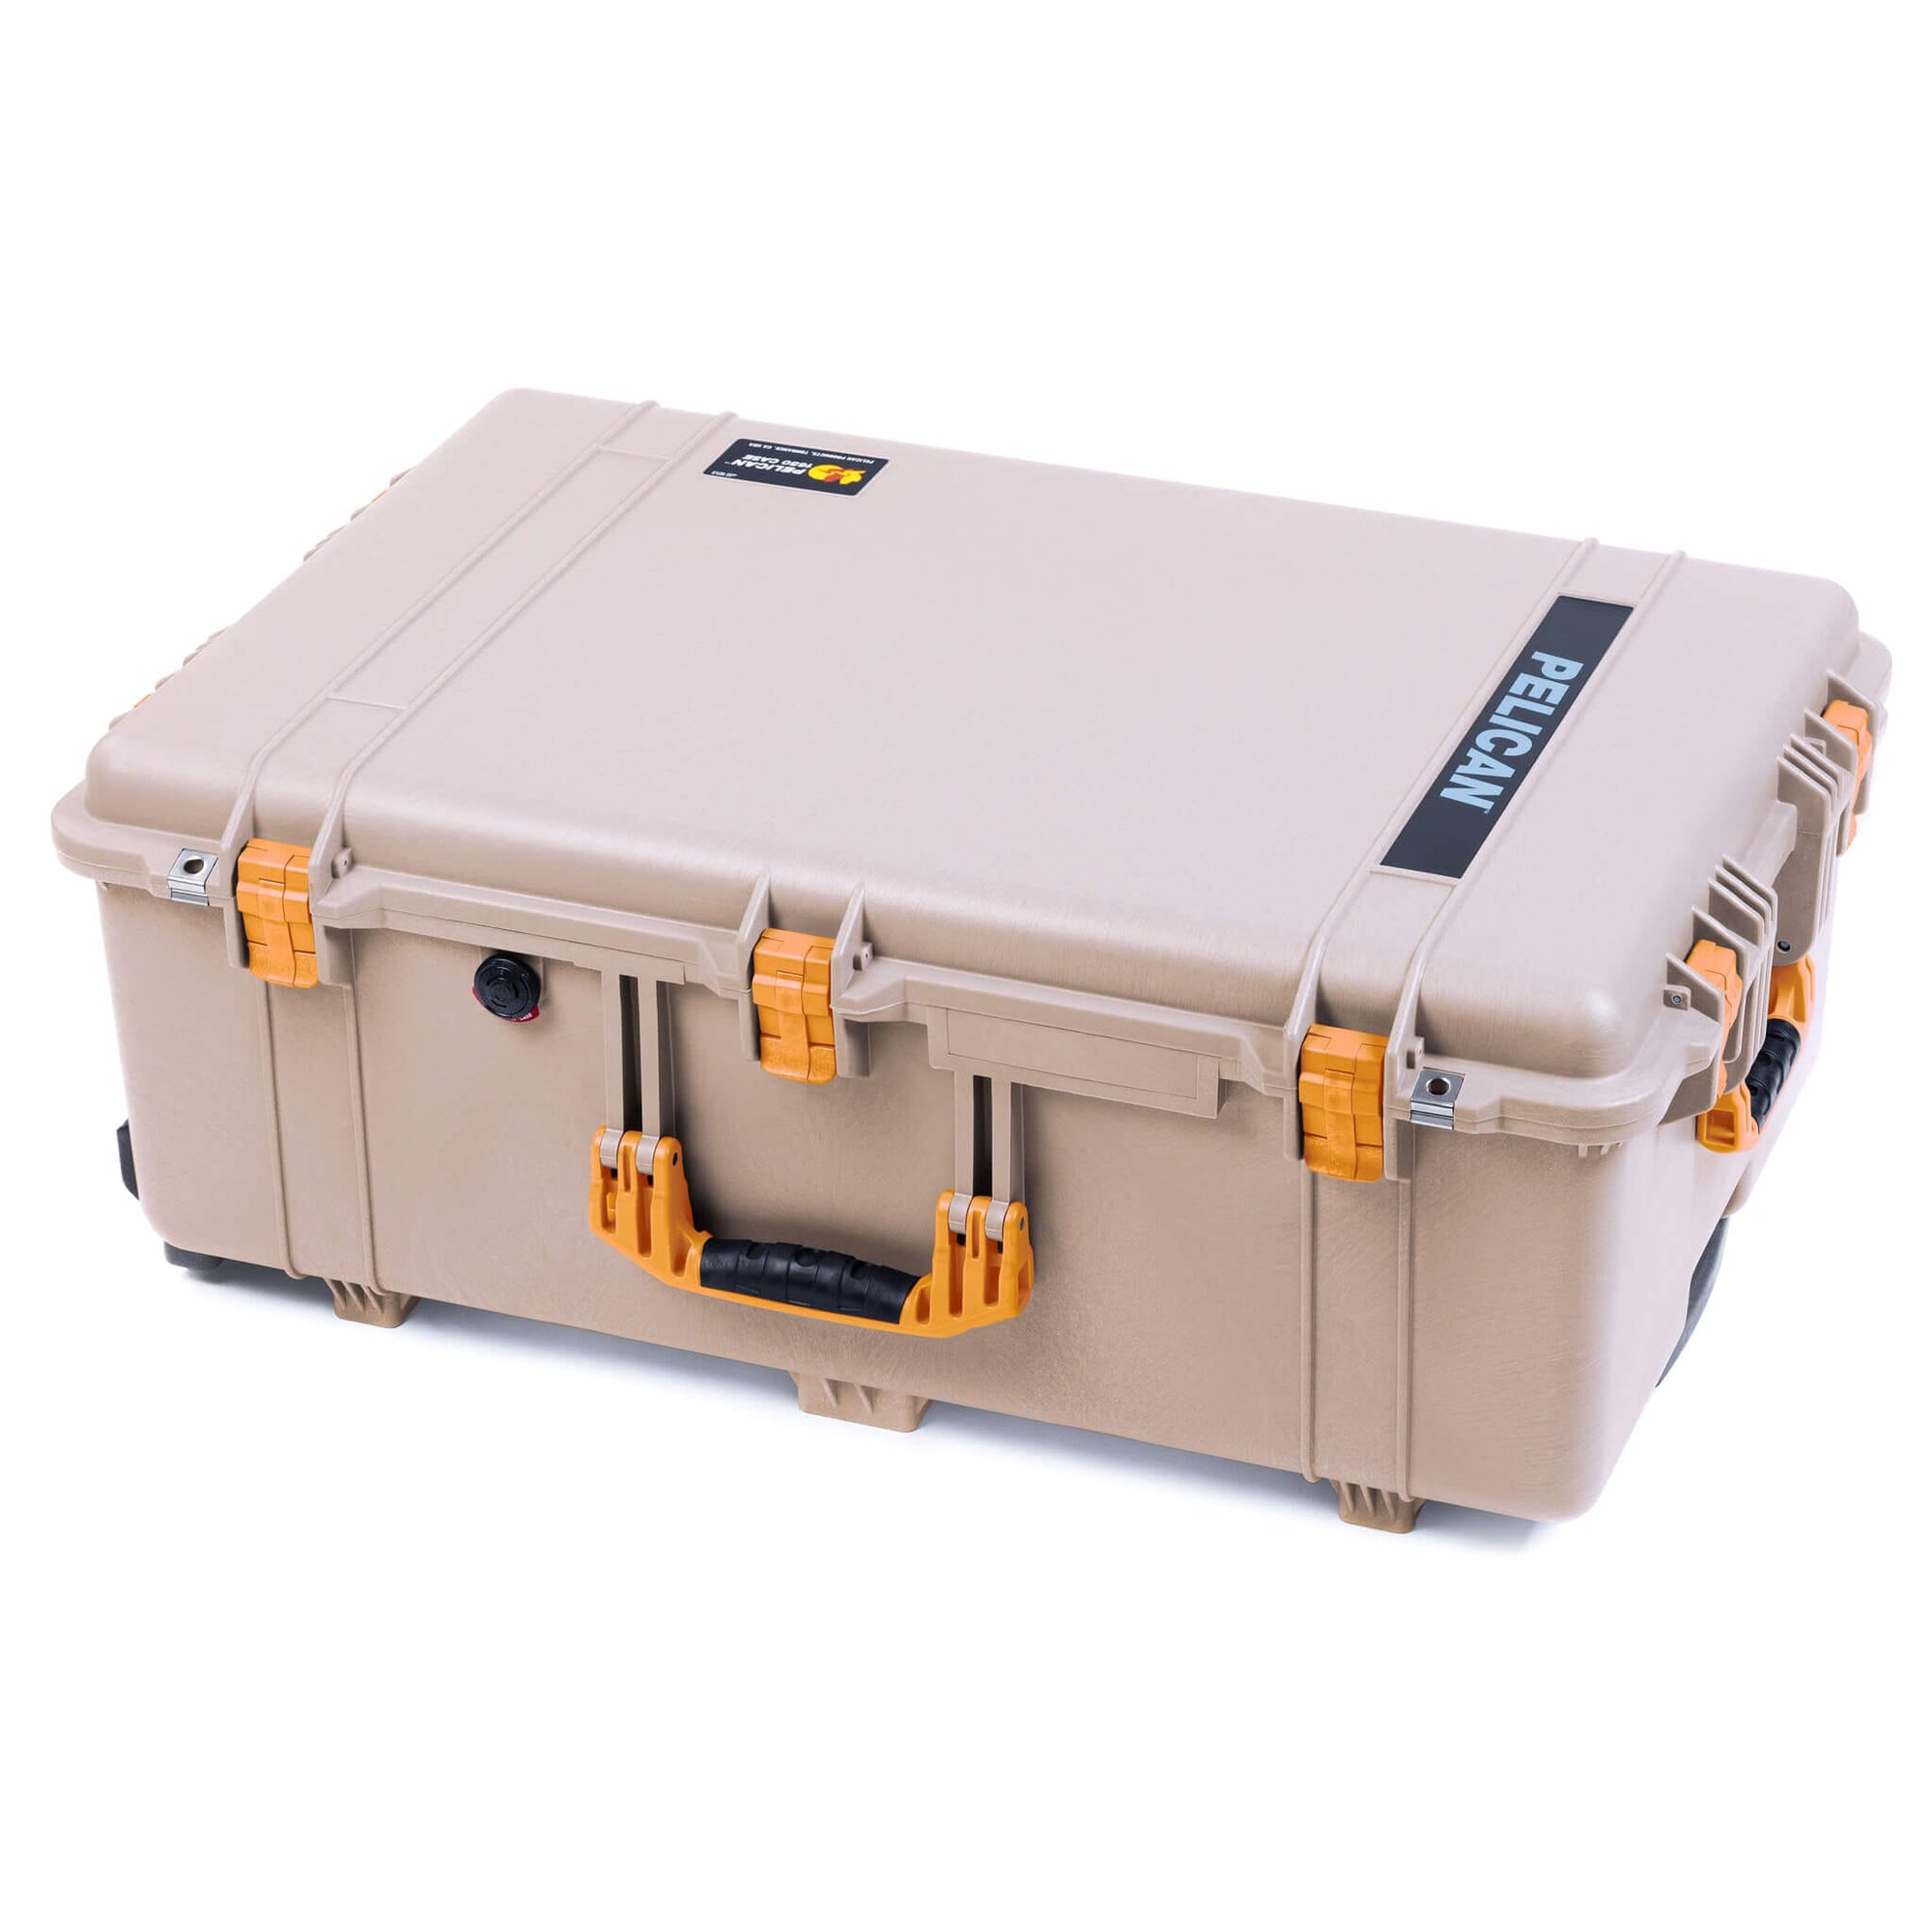 Pelican 1650 Case, Desert Tan with Yellow Handles & Latches ColorCase 